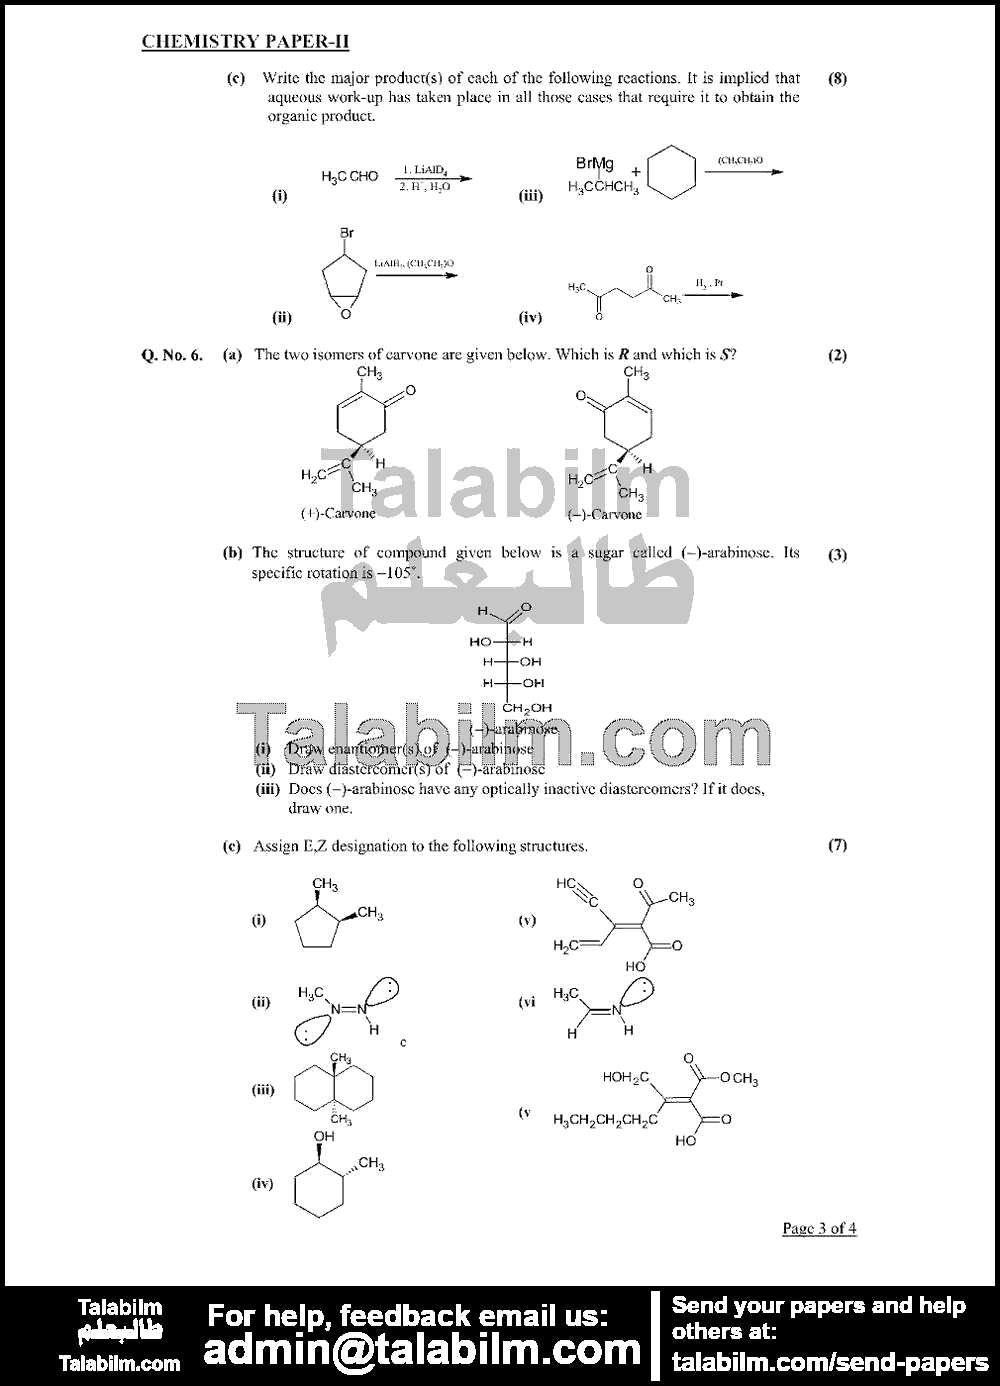 Chemistry 0 past paper for 2016 Page No. 4